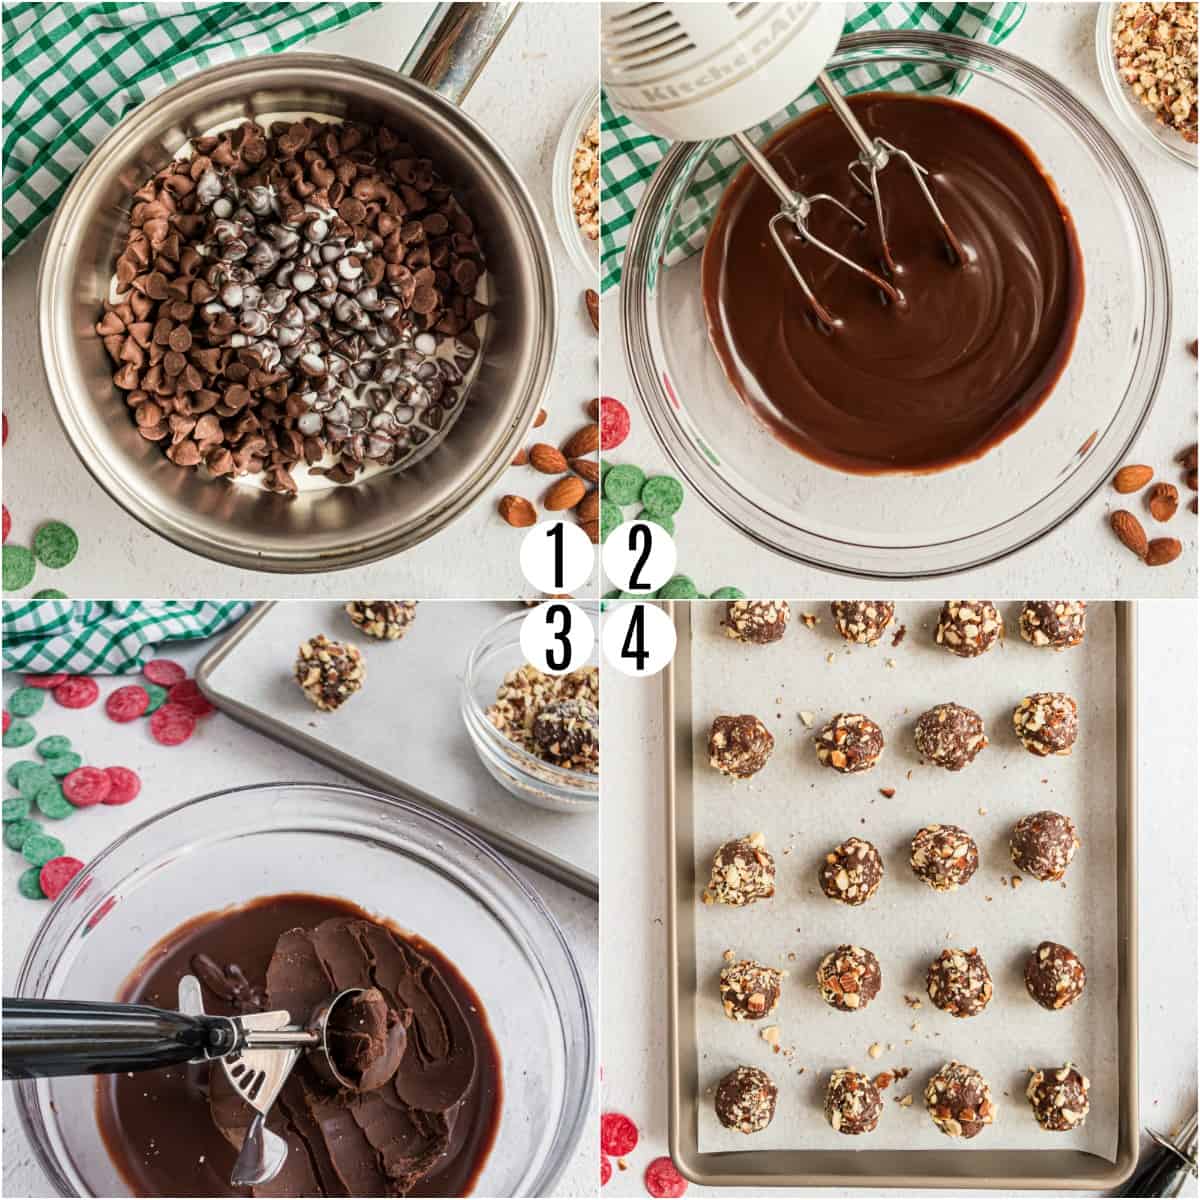 Step by step photos showing how to make almond truffles.